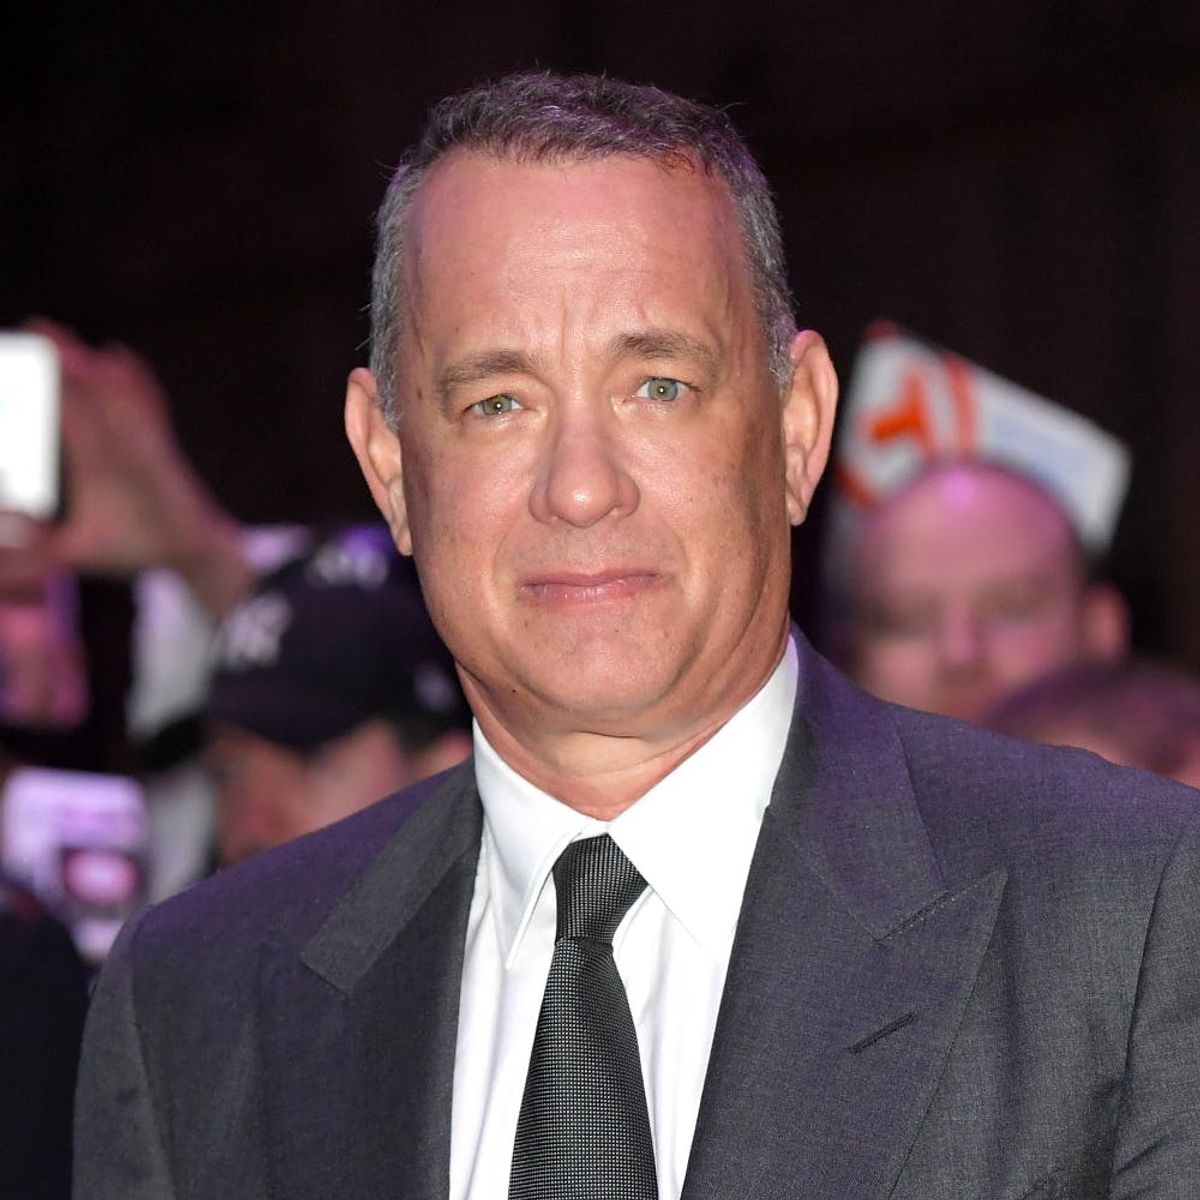 Tom Hanks Just Sent a Fan the BEST Gift